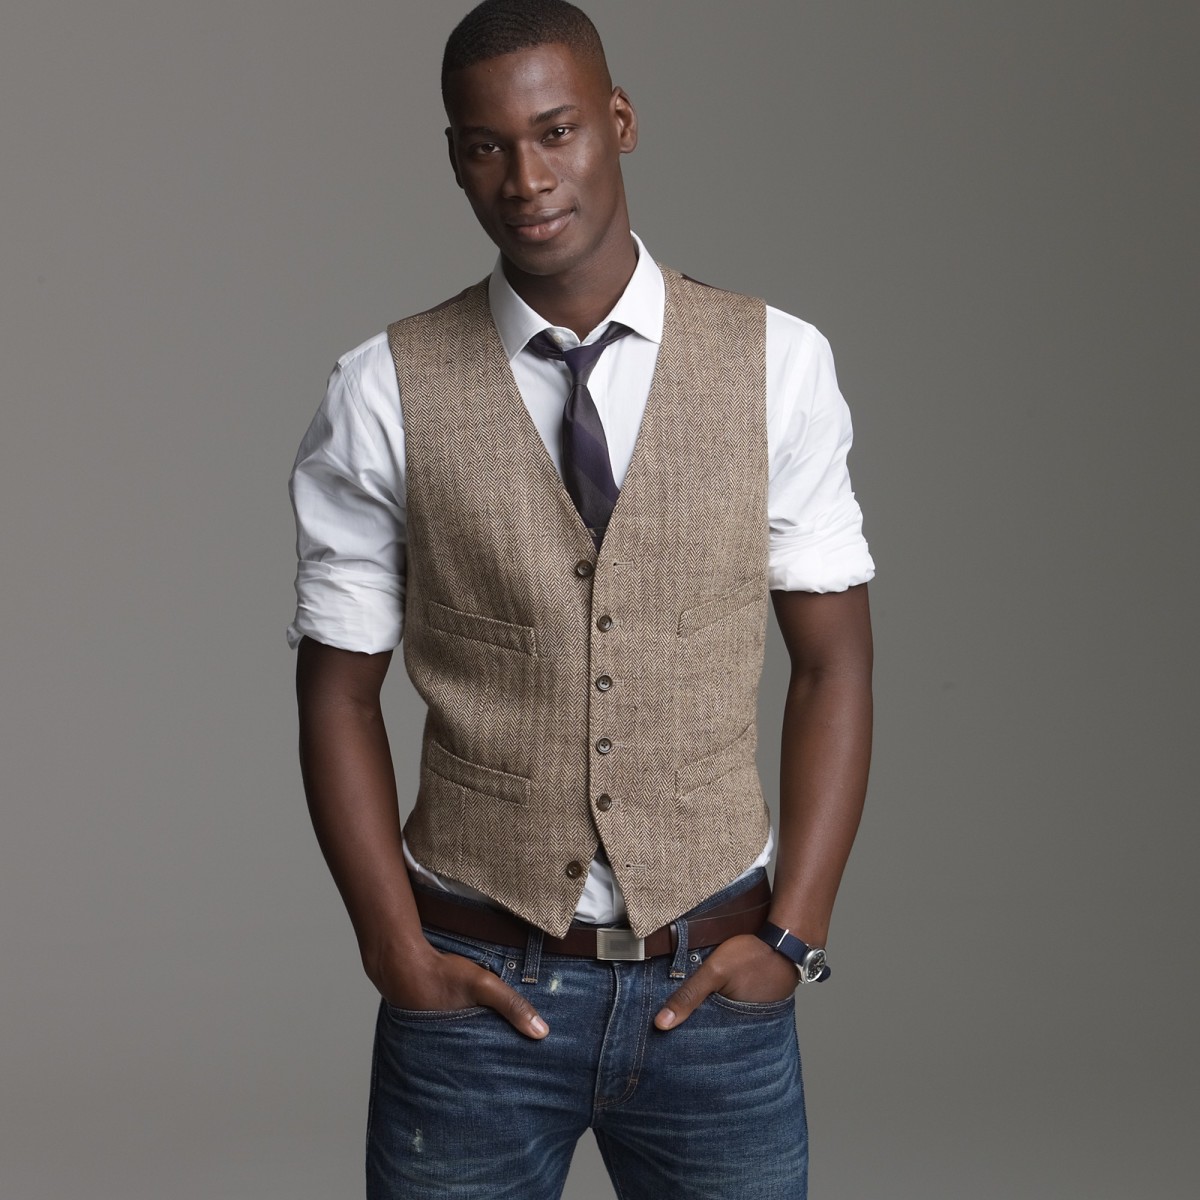 Vests are a matter of personal comfort and style when it comes to deciding whether or not to wear to a salsa club.